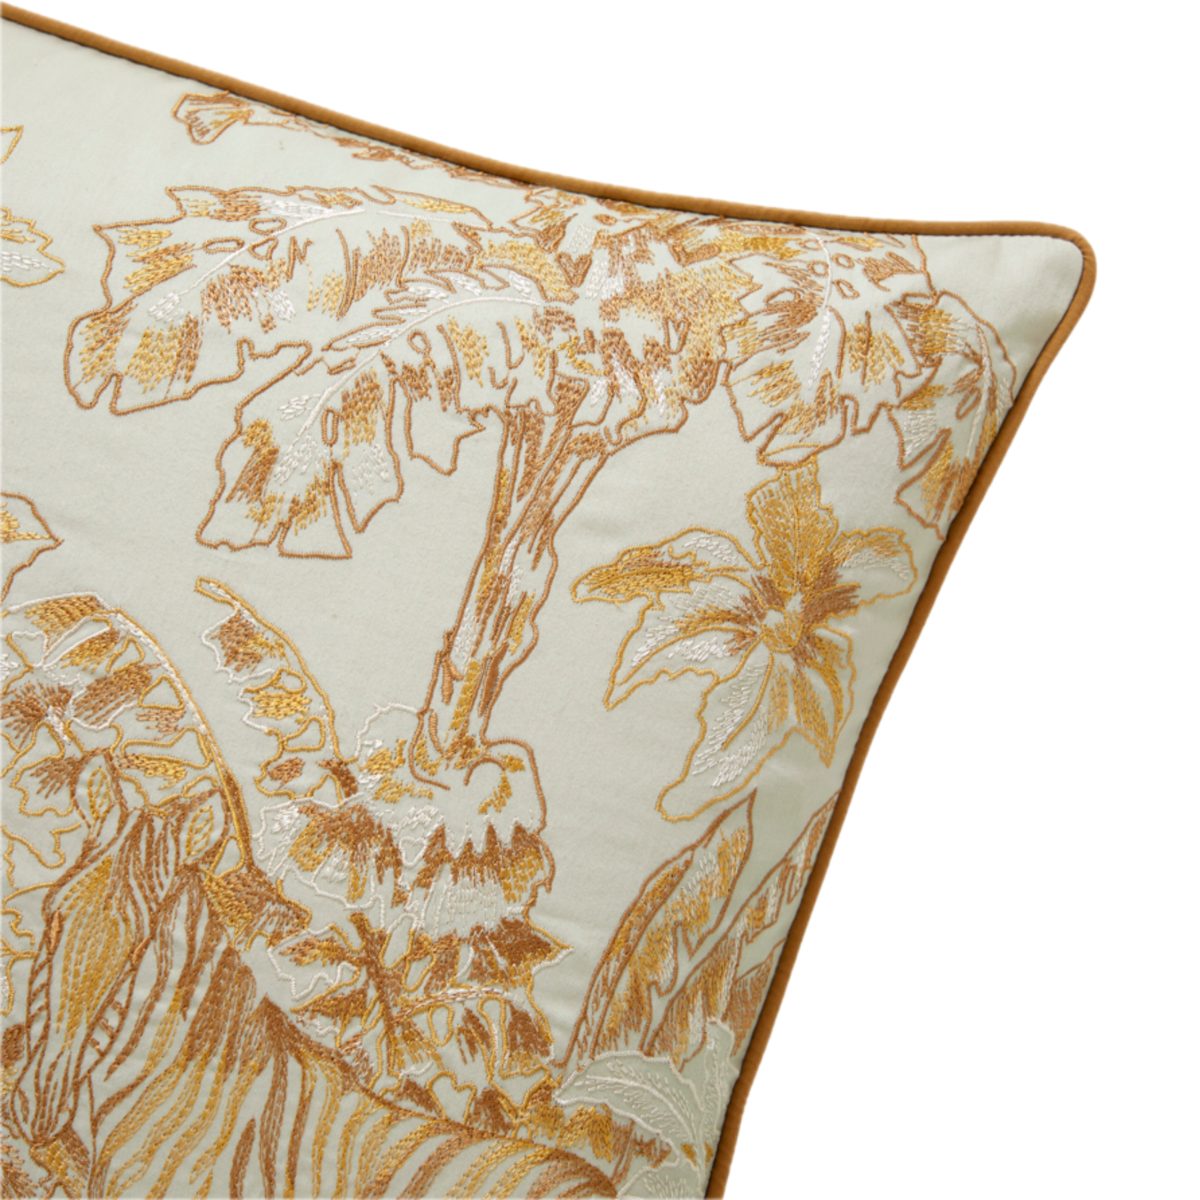 Corner Detail of Yves Delorme Faune Decorative Pillow